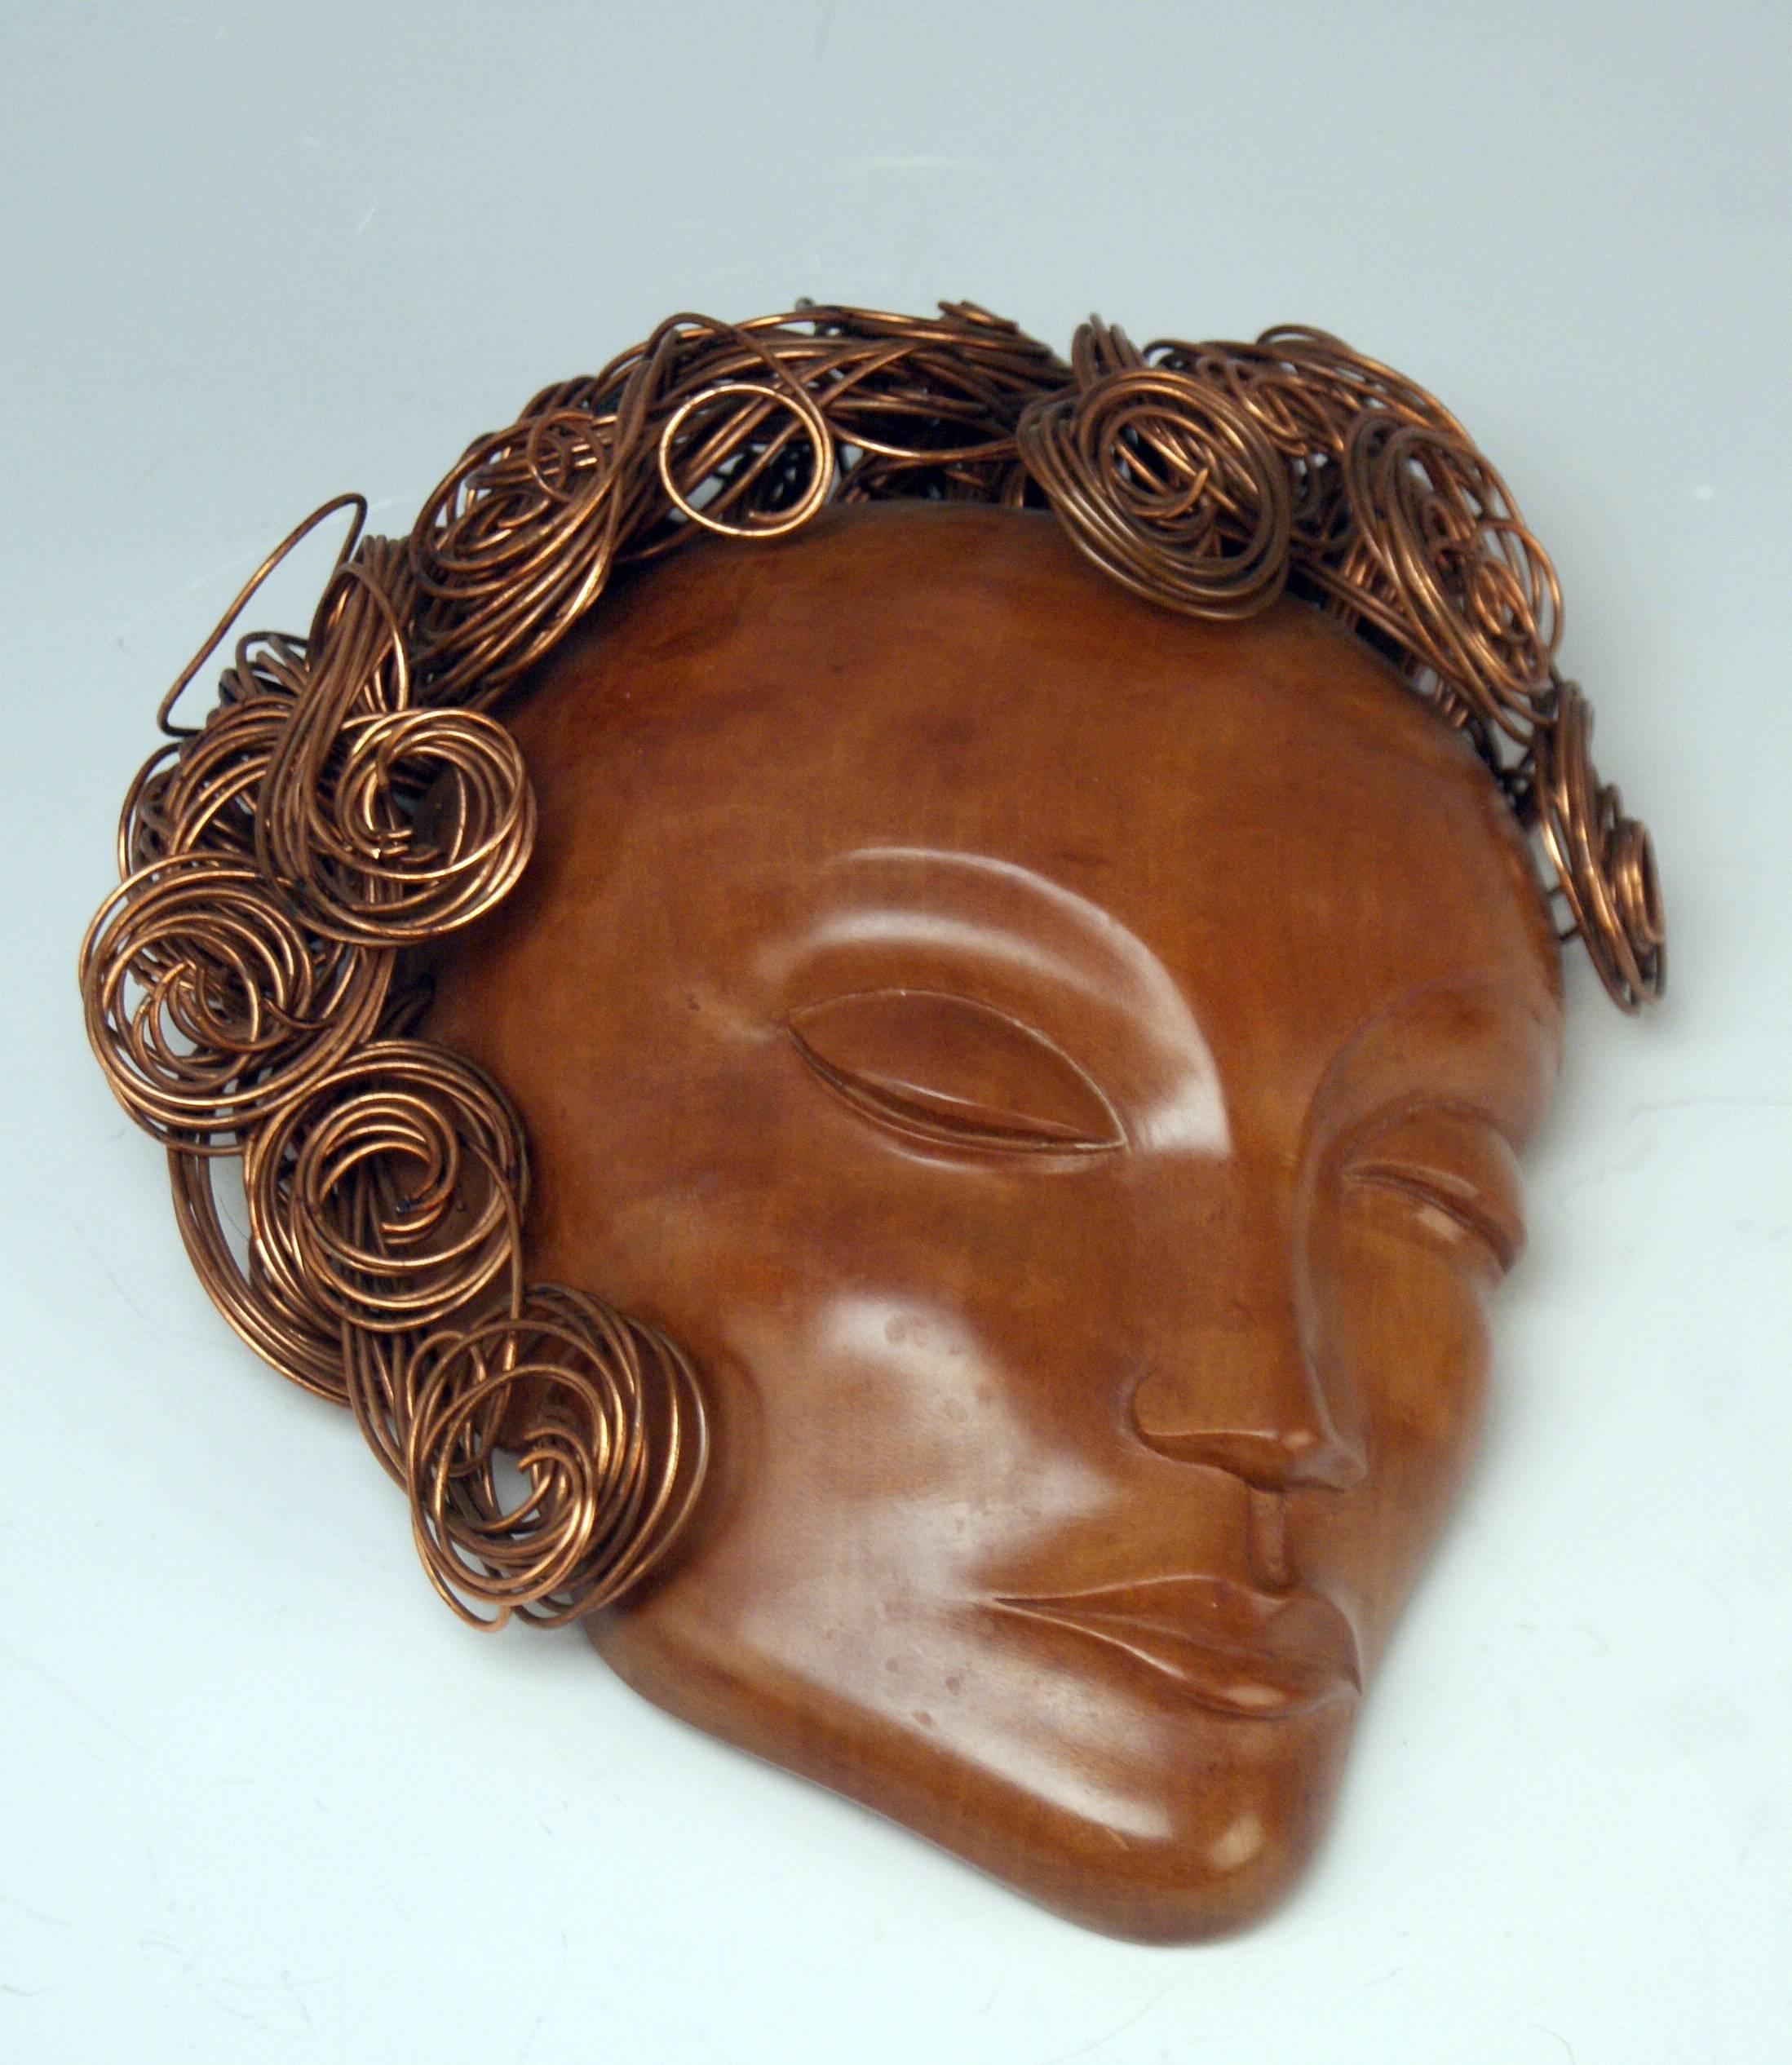 Finest Art Deco rarest Hagenauer Vienna head of a lady with curled hair:
The lady's head made of carved wood is covered with curled hair - these ones consisting of elegant curled threads made of copper. - Signed at reverse side of wooden head by